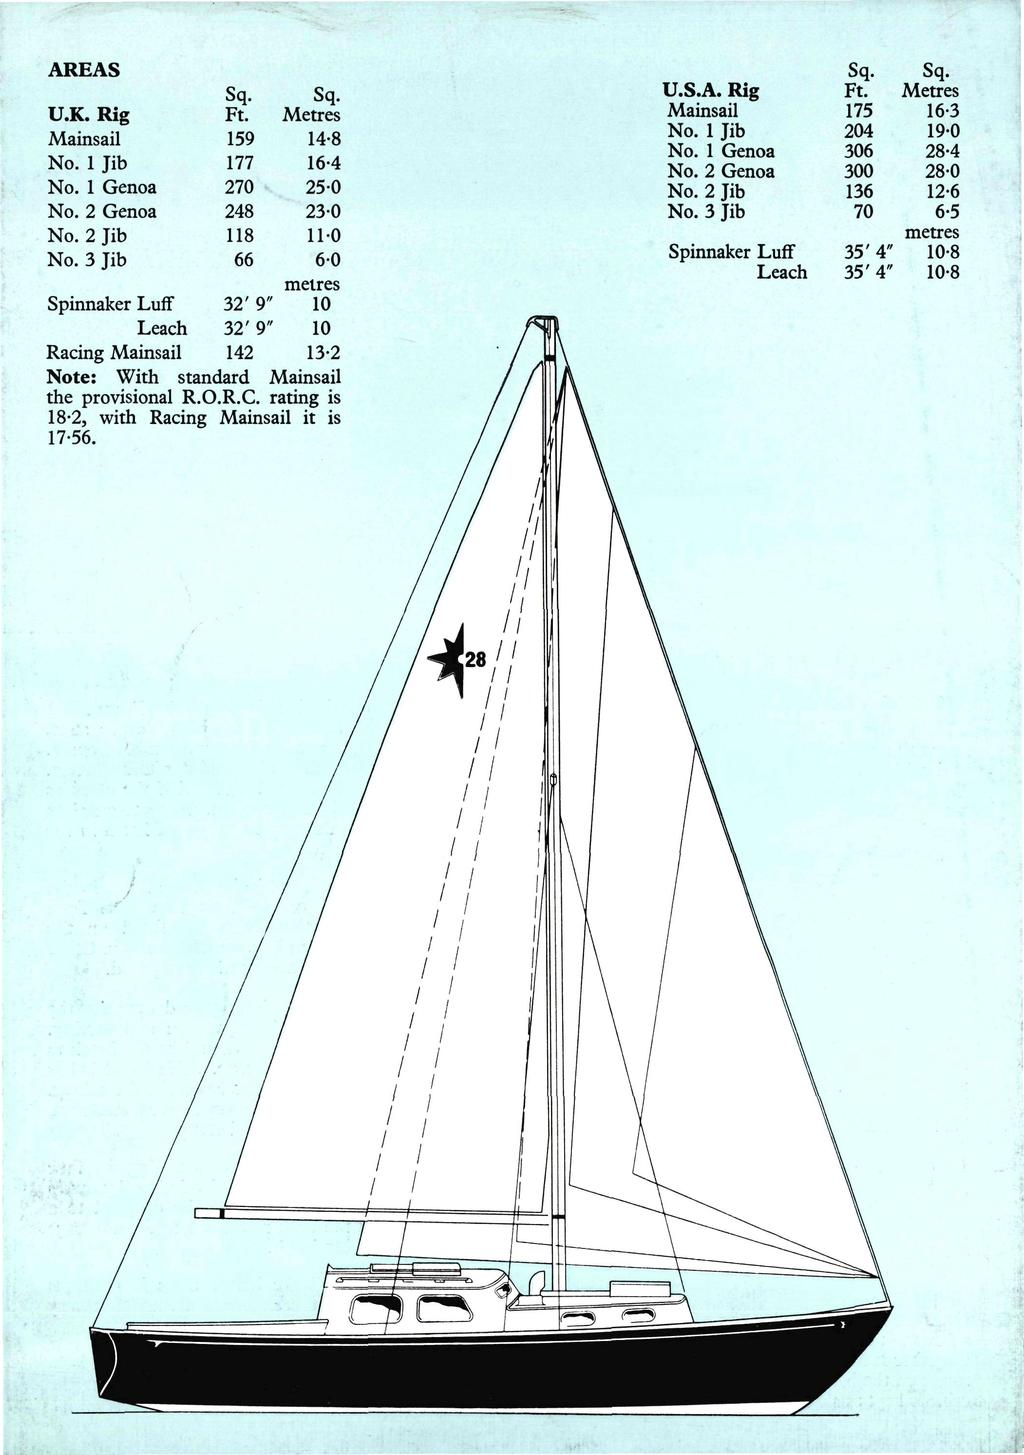 AREAS Sq. Metres 14-8 16-4 25-0 230 11-0 60 melres Spinnaker Luff 32' 9" 10 Leach 32' 9" 10 Rating Mainsail 142 13-2 Note: With Standard Mainsail the provisional R.O.R.C.